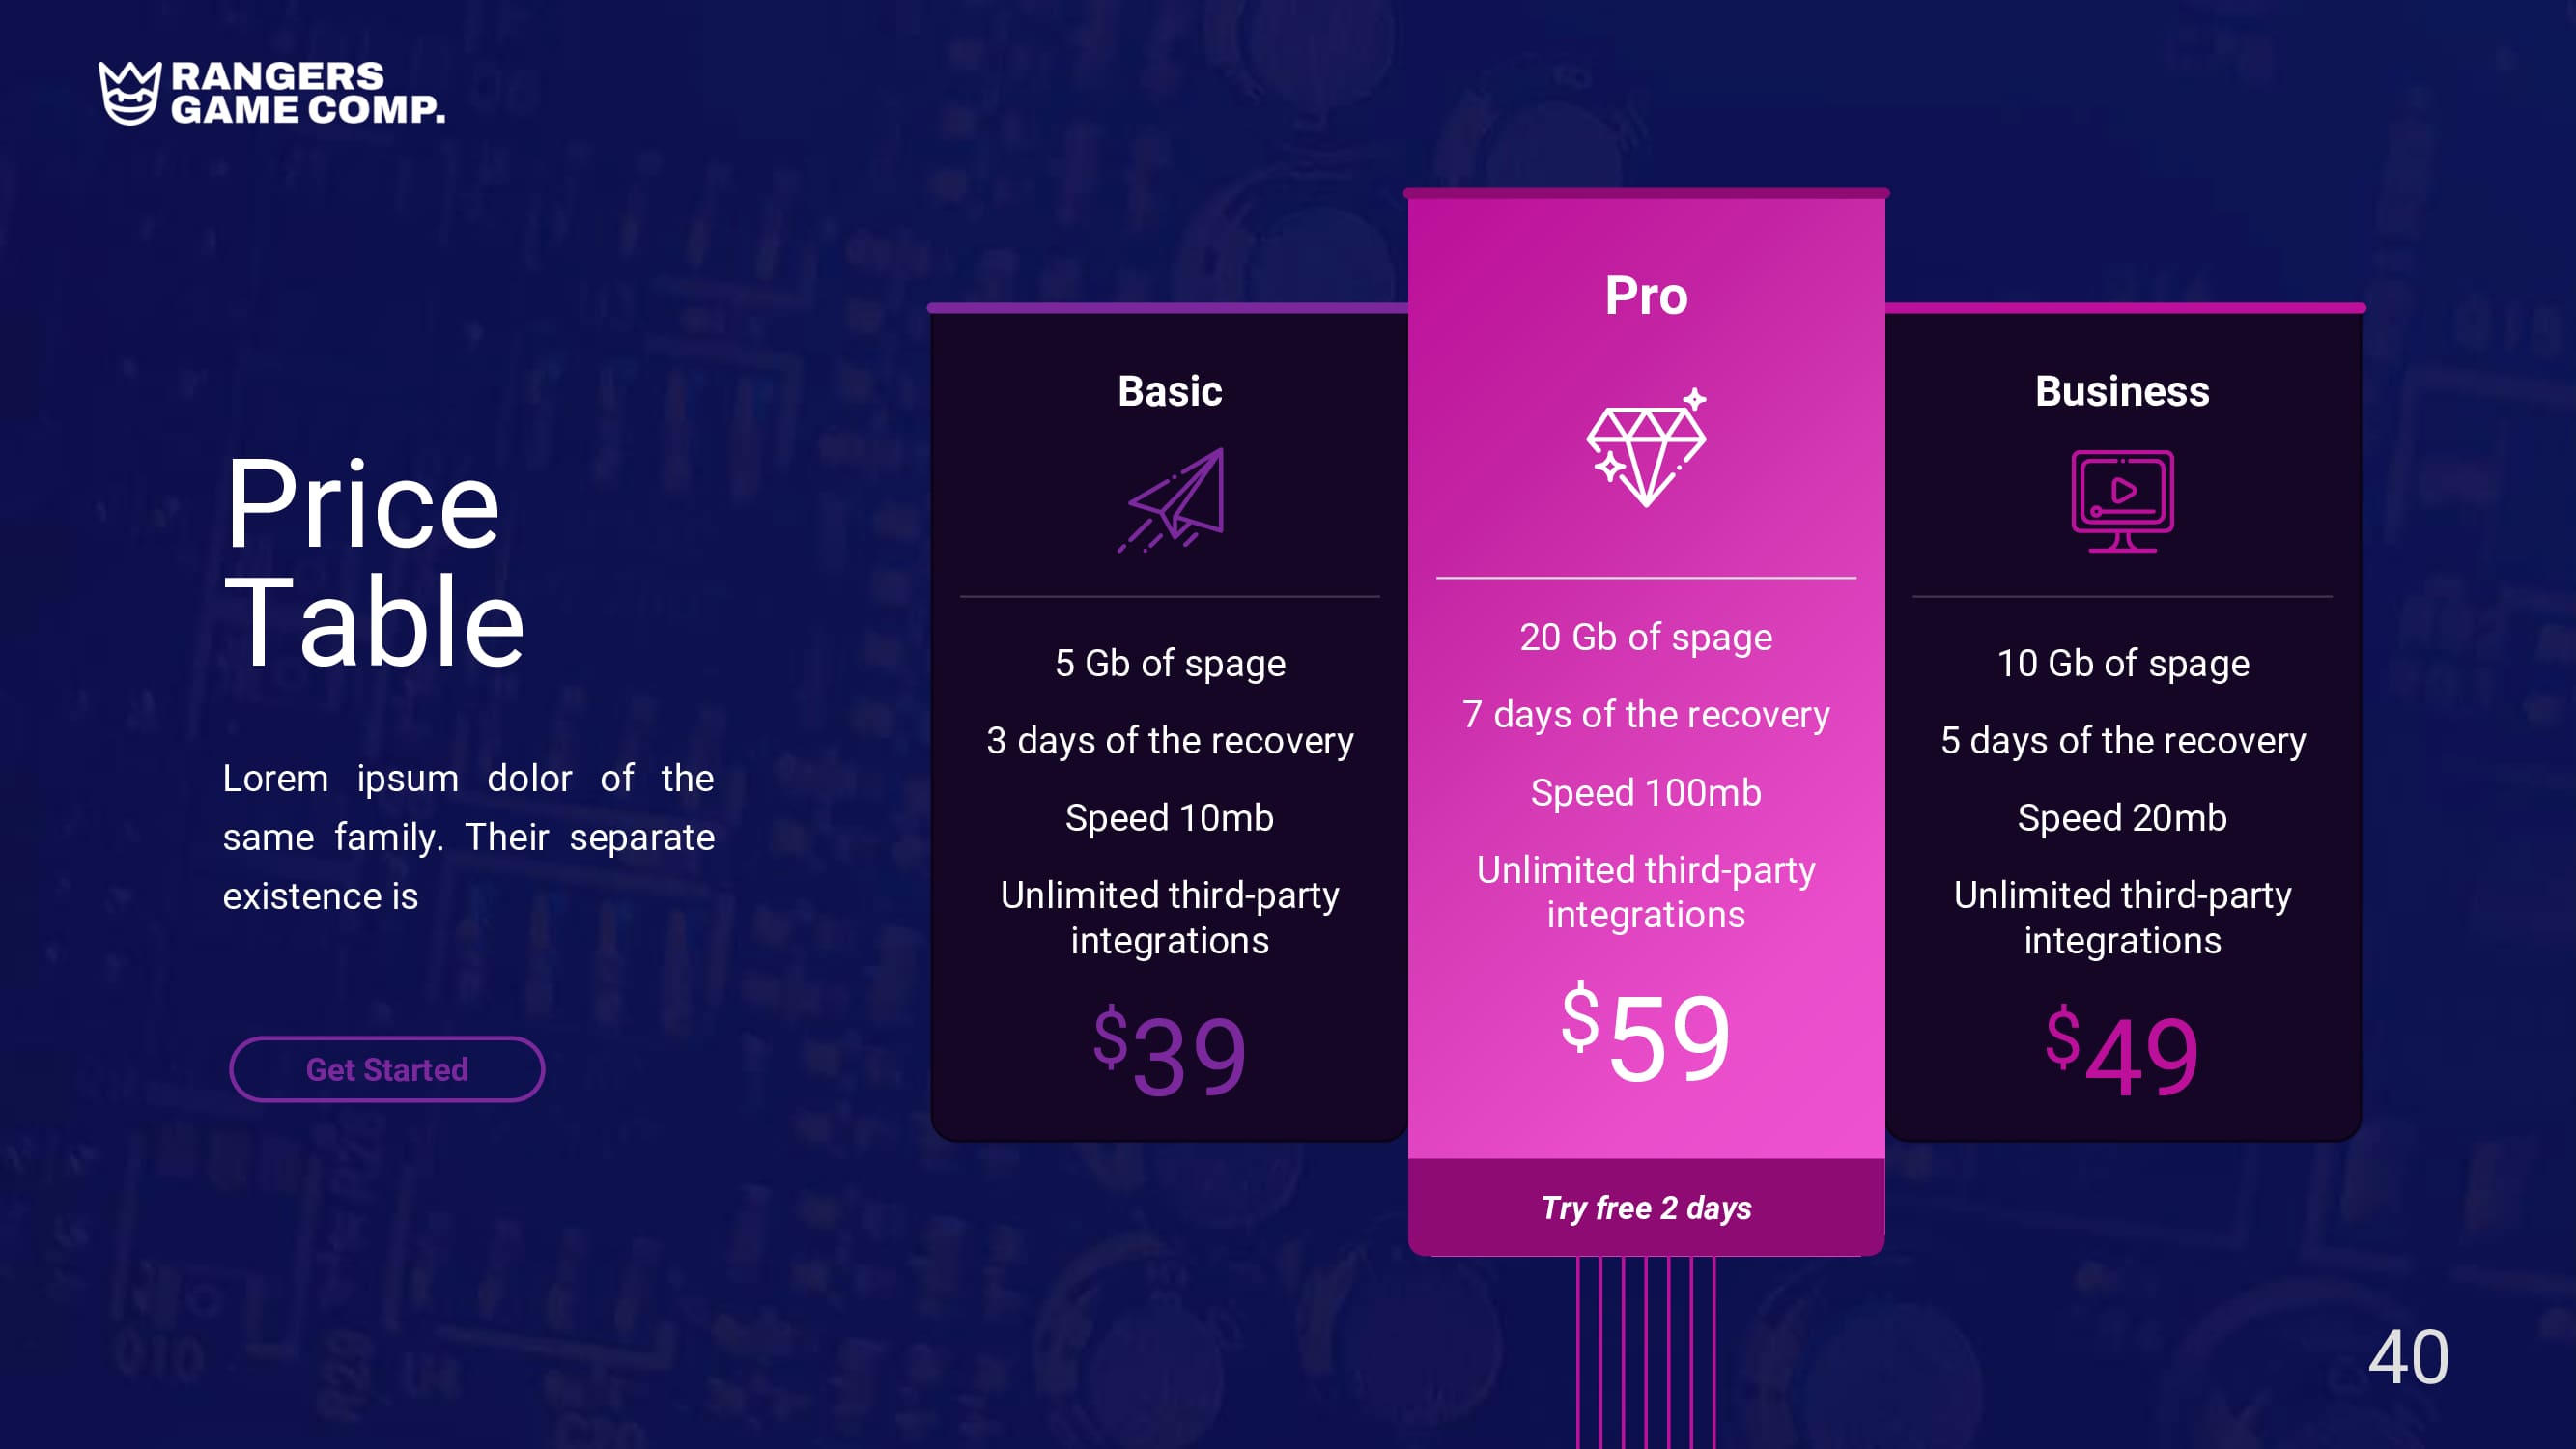 Pricing table slide with 3 paid packages - pro, basic and business.